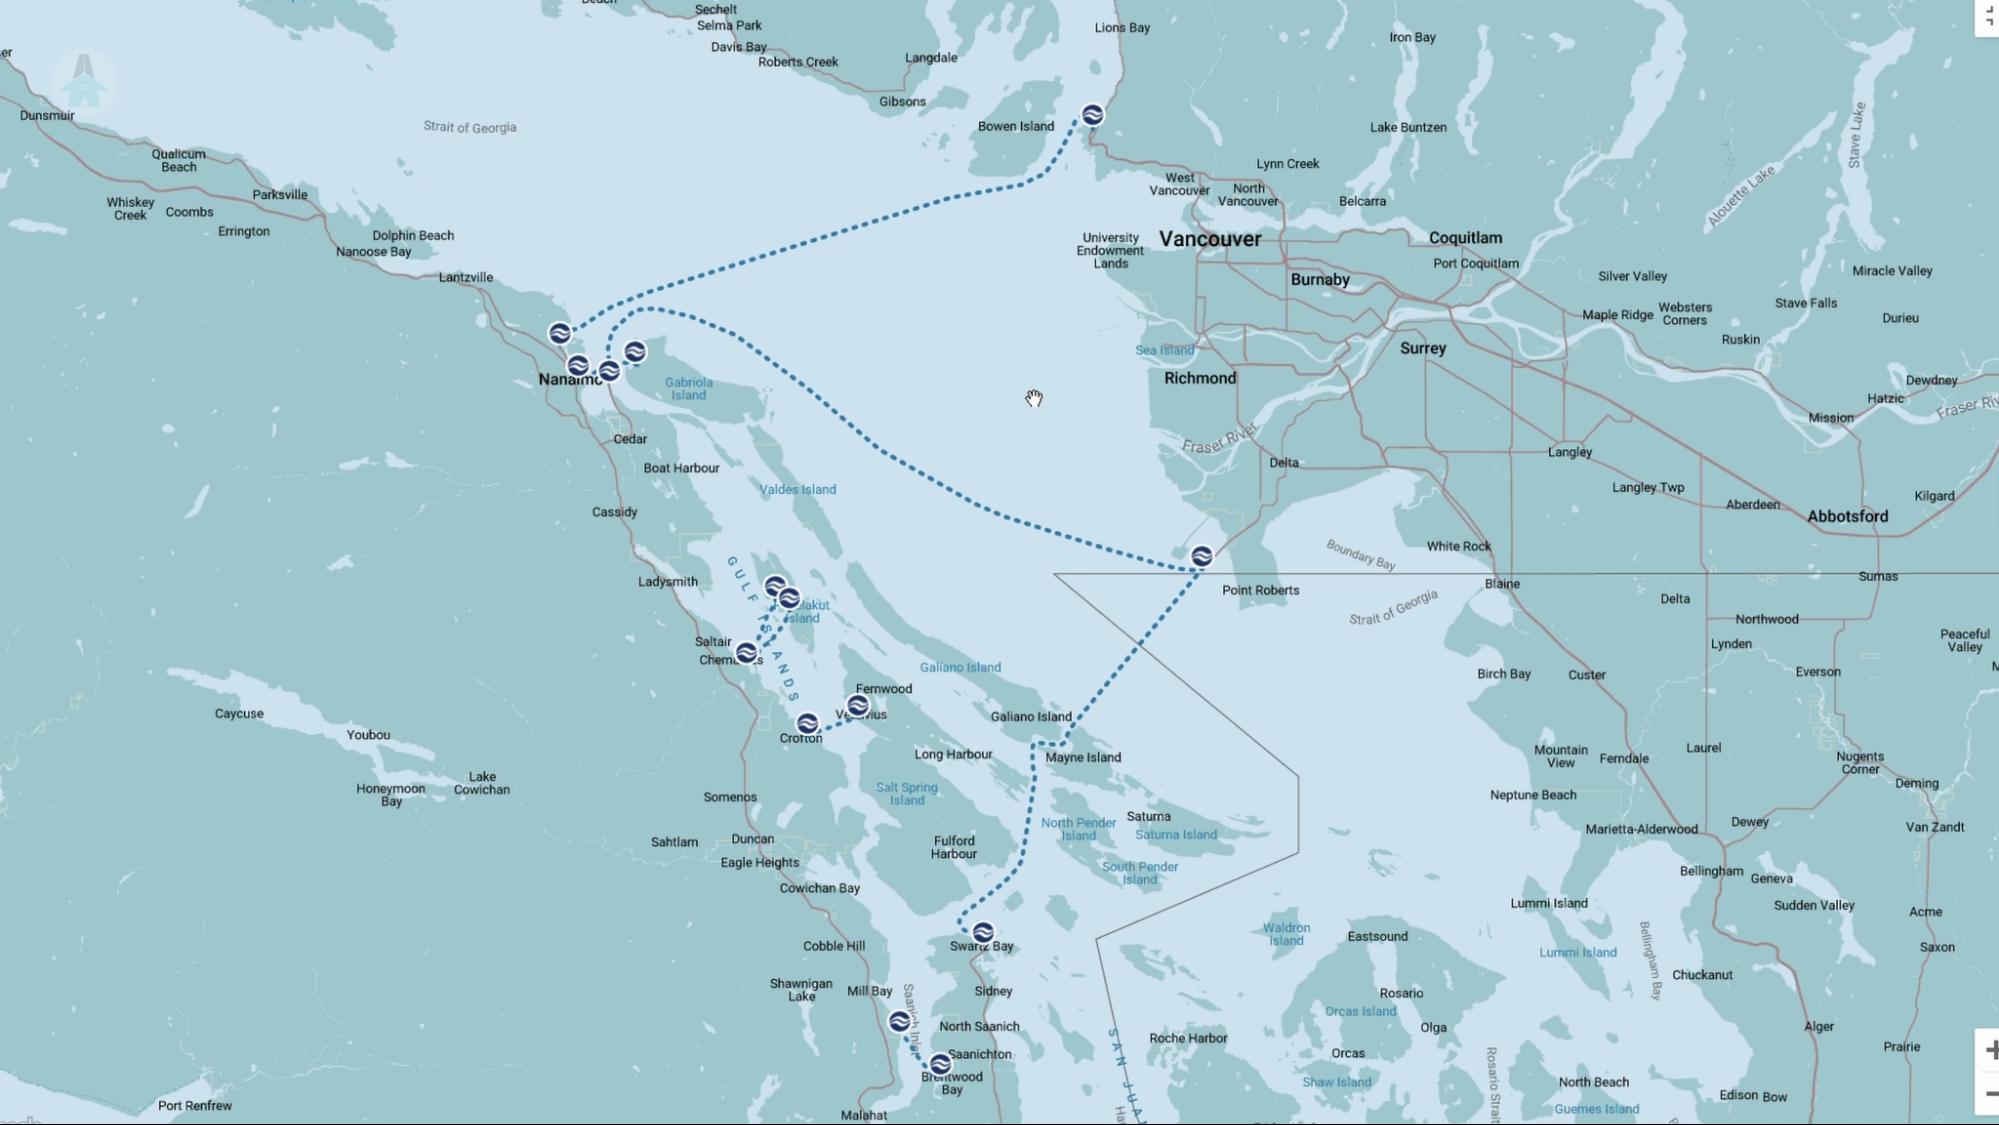 BC ferries connects Vancouver to Vancouver Island by way of ferry between Horseshoe Bay and Nanaimo, Tsawwassen and Schwartz Bay or Tsawwassen and Nanaimo.  